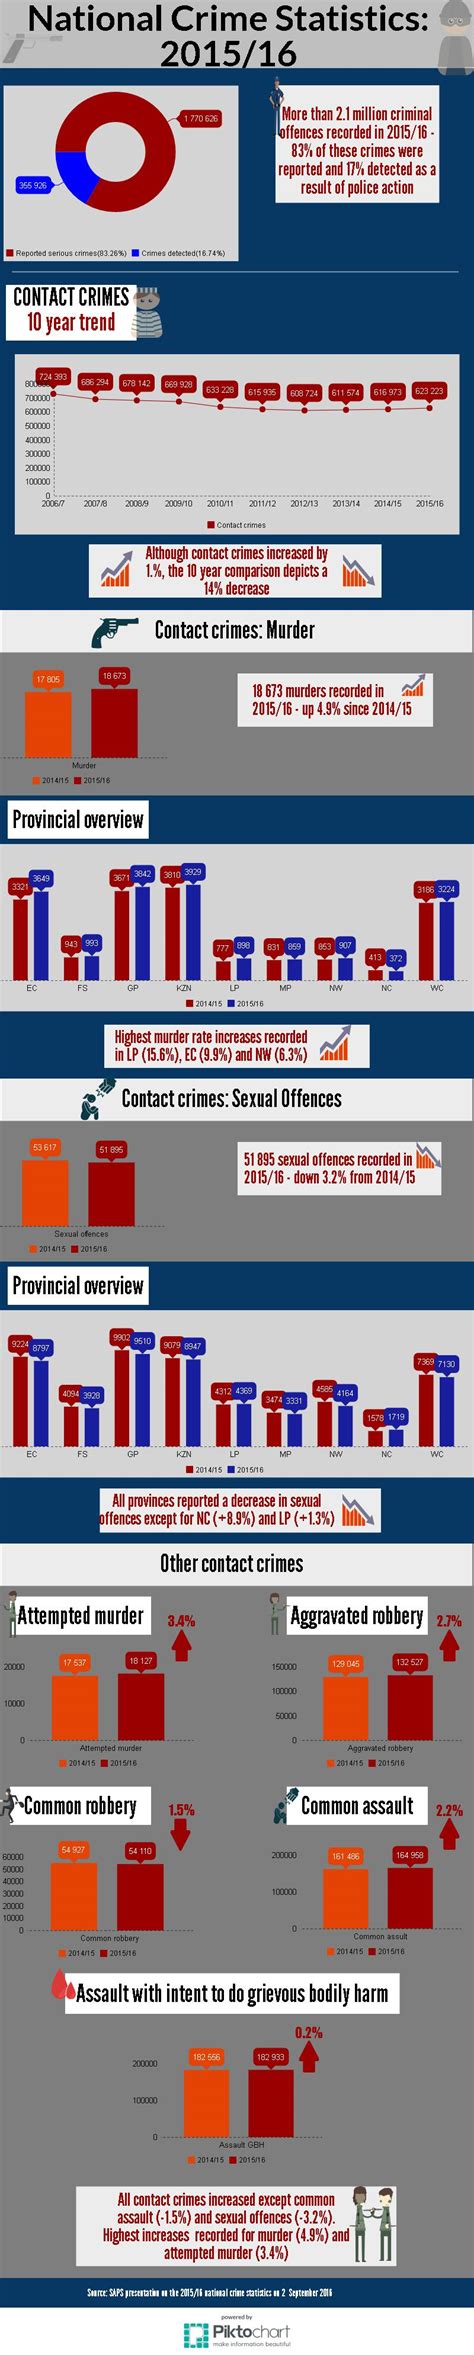 infographic 2015 16 national crime statistics people s assembly